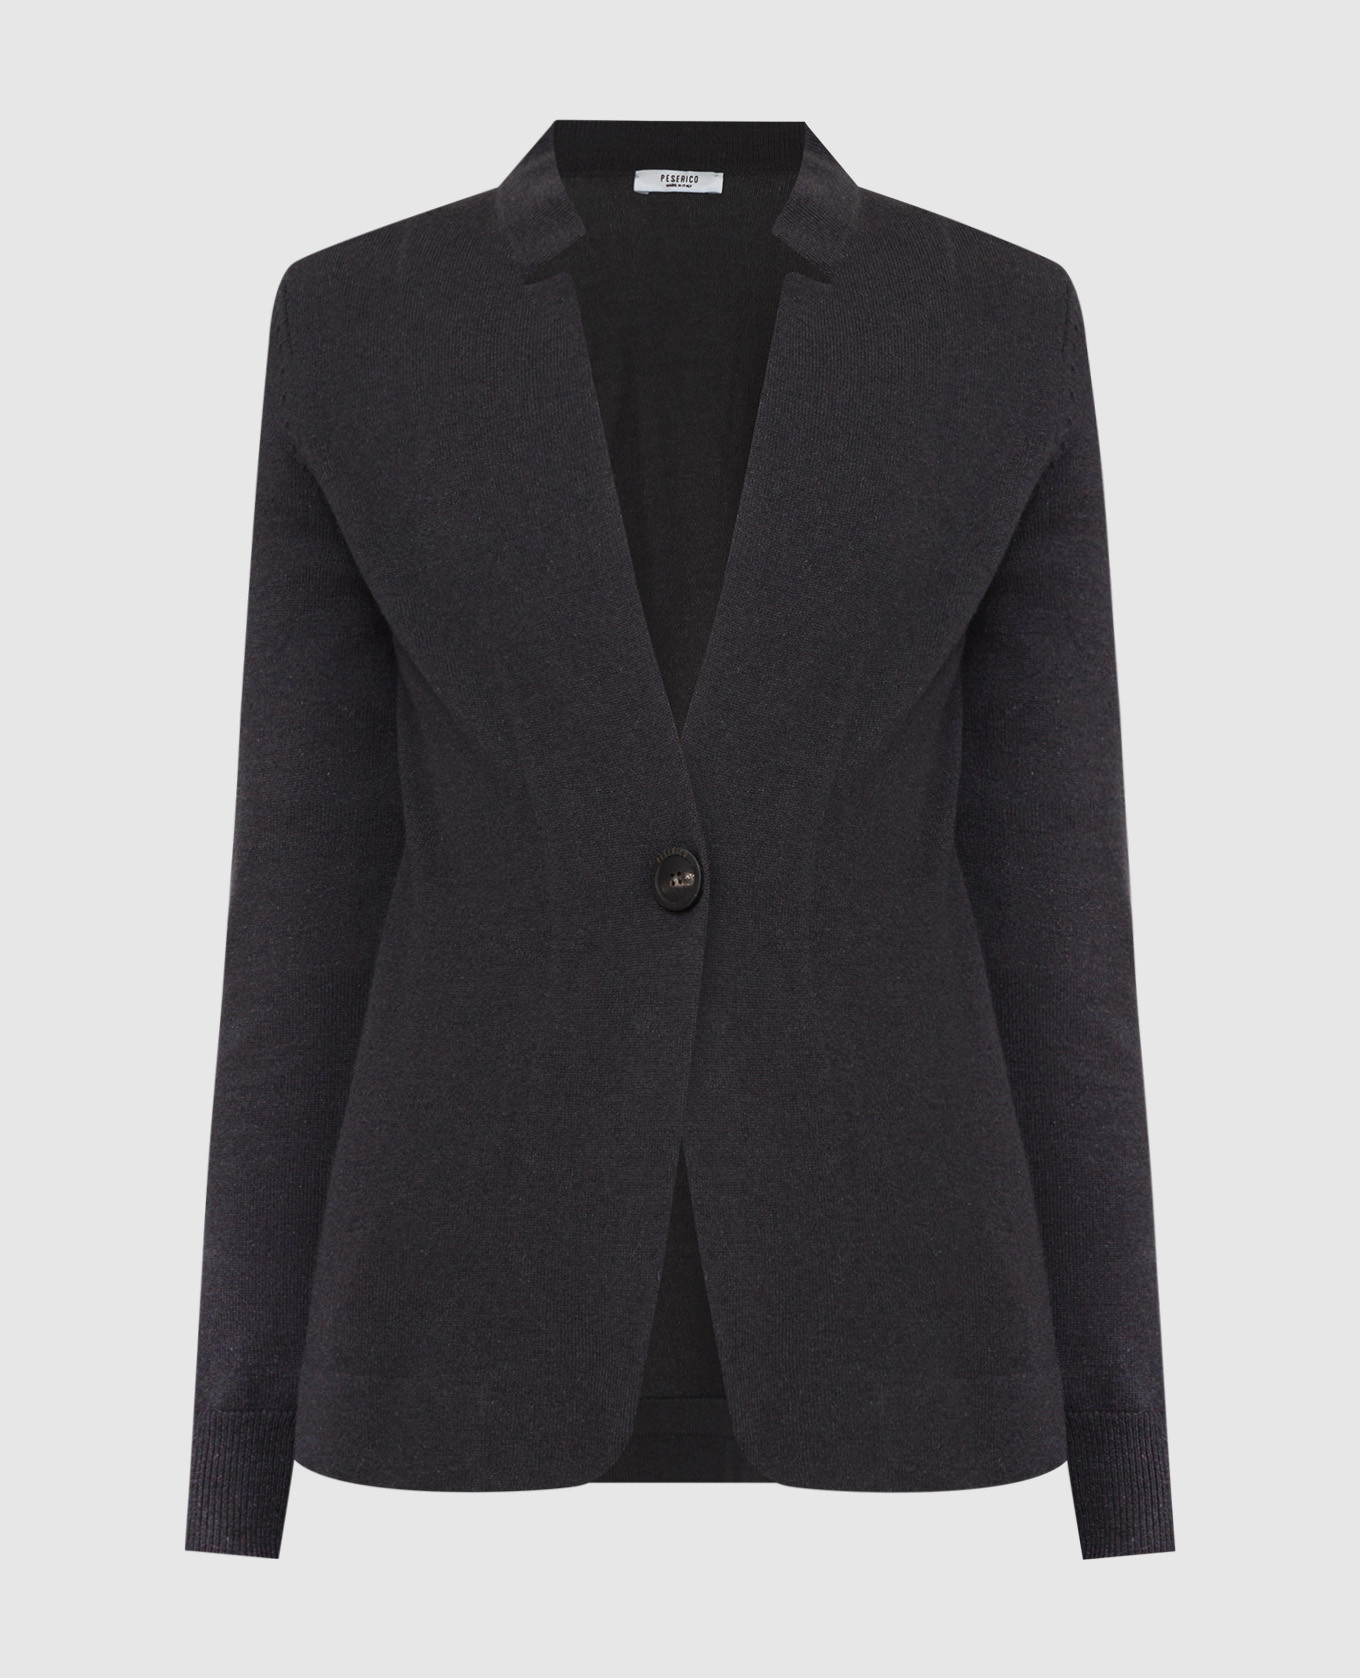 Graphite cardigan in wool, silk and cashmere